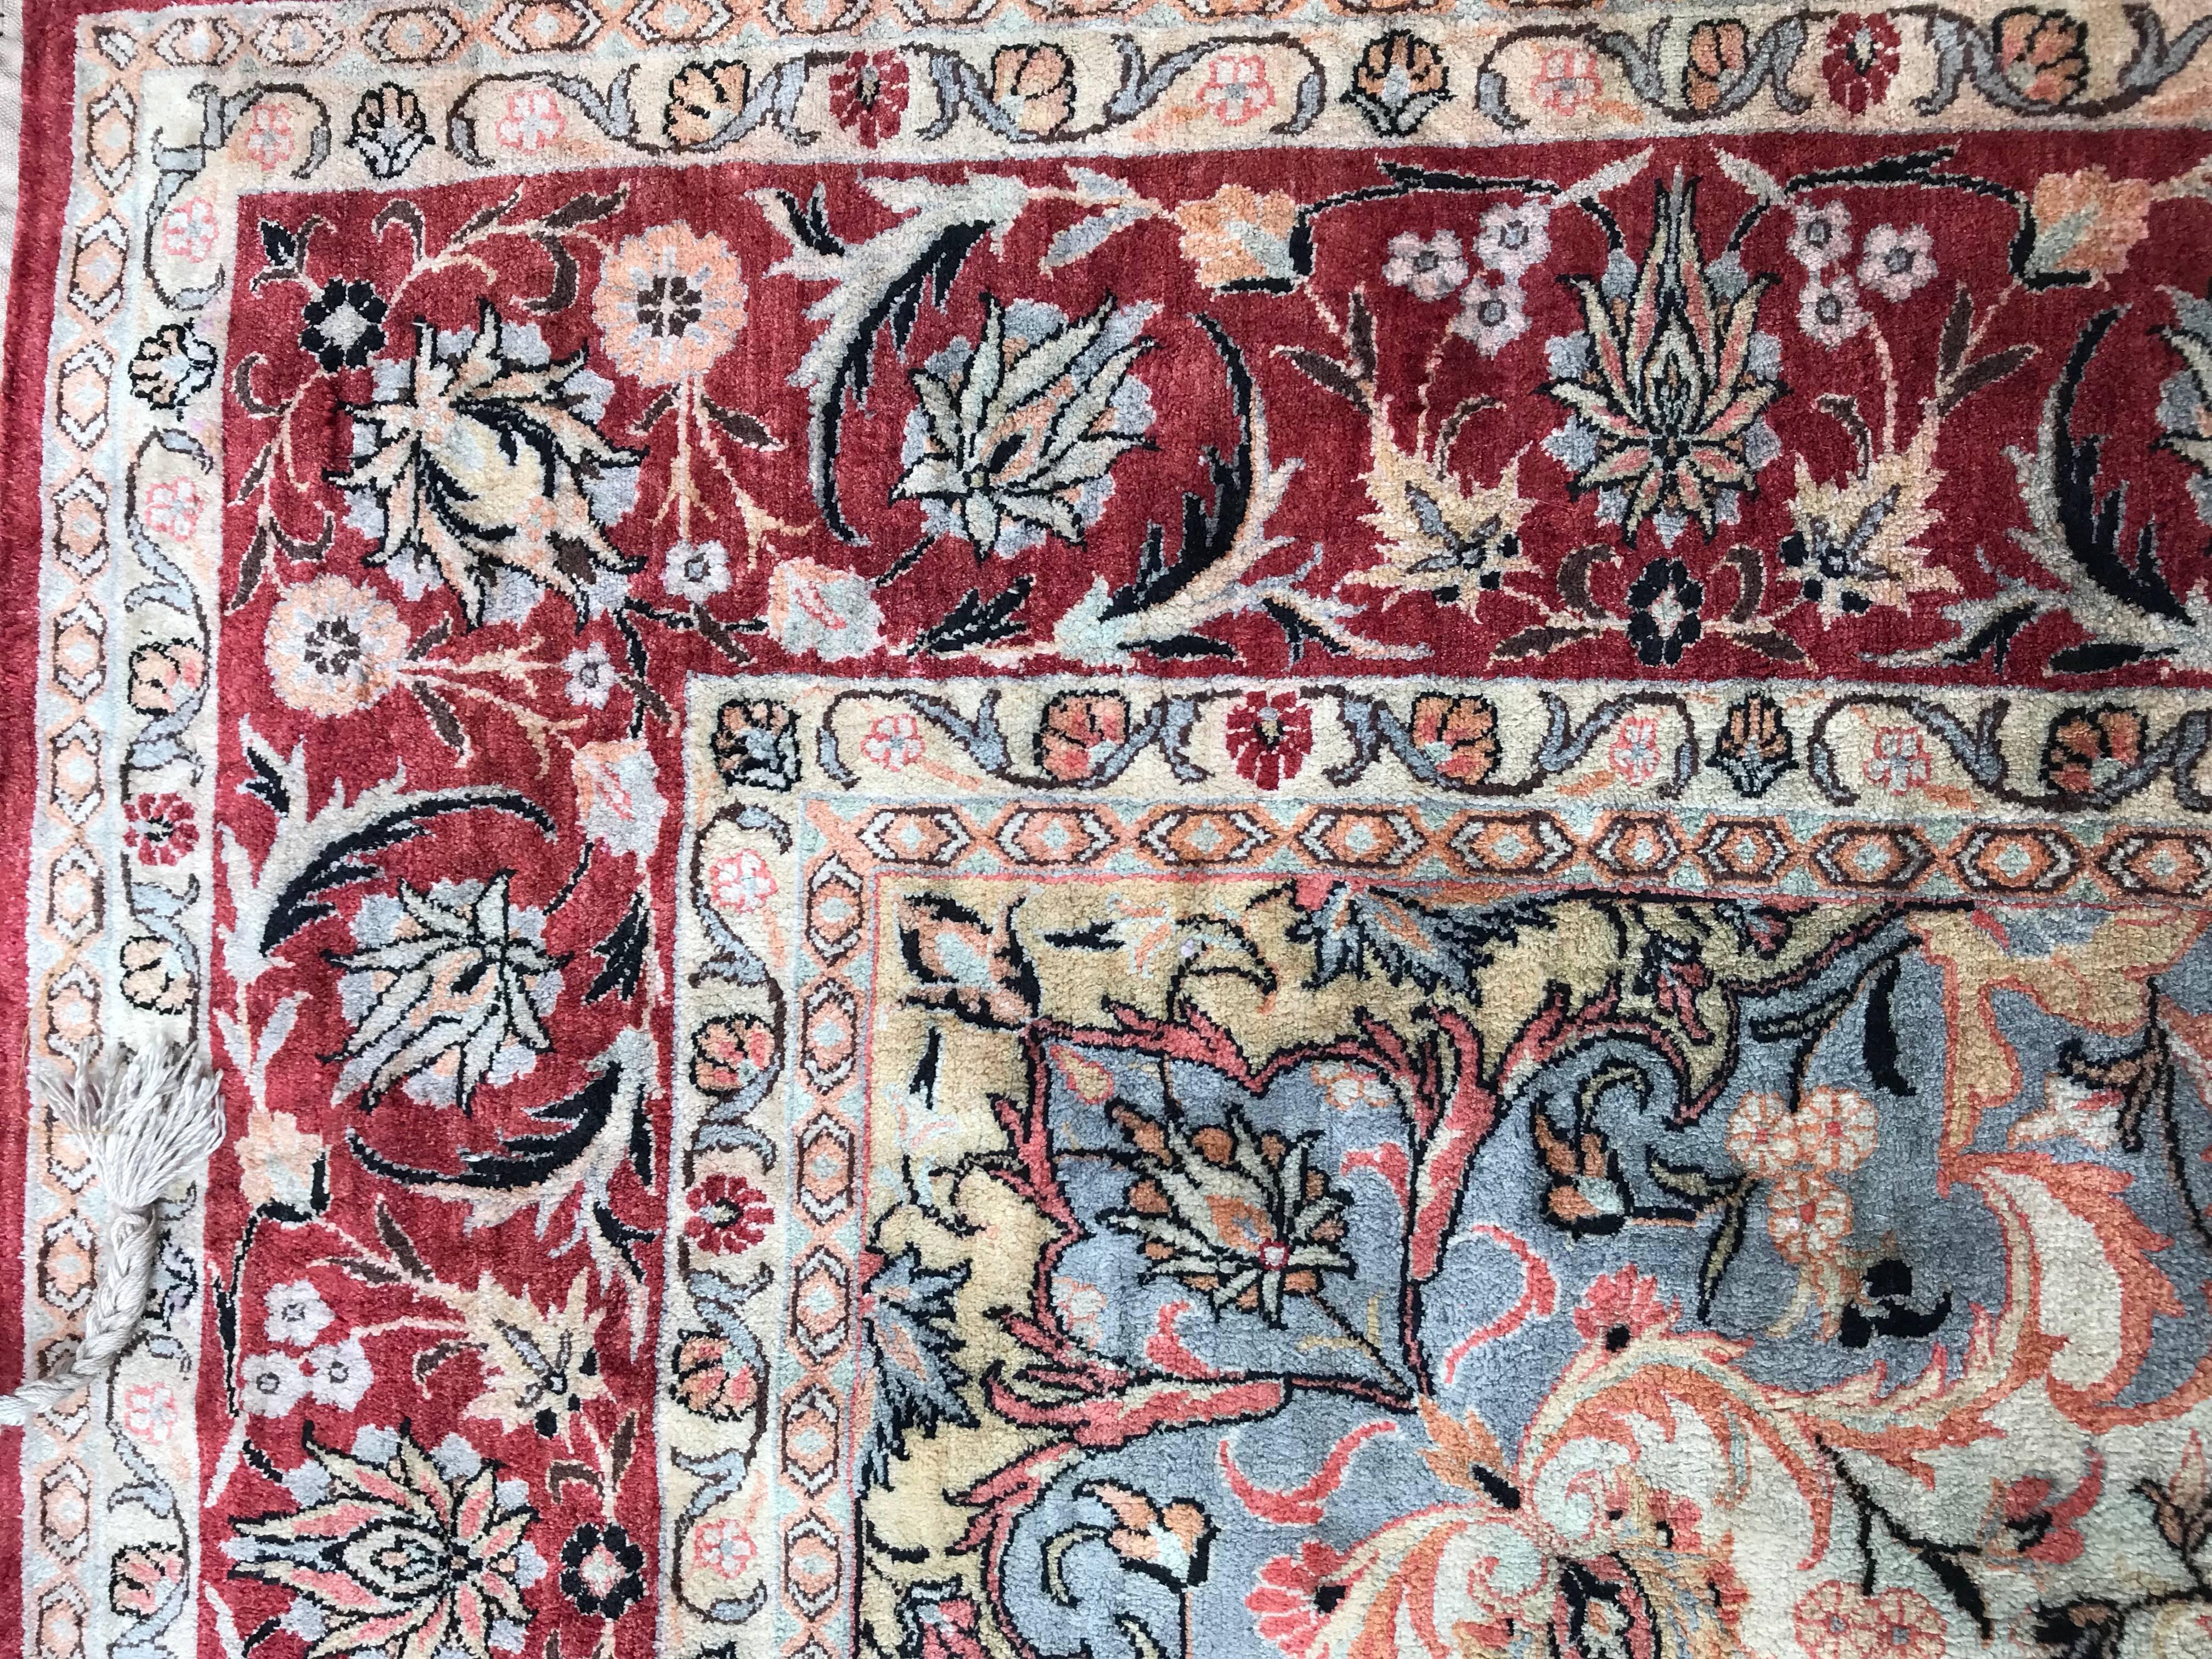 Very beautiful and fine contemporary silk rug in style of Persian Ispahan rugs, with nice floral central medallion design and light colors with red, light blue, pink, yellow and orange, entirely and finely hand knotted with silk velvet on silk